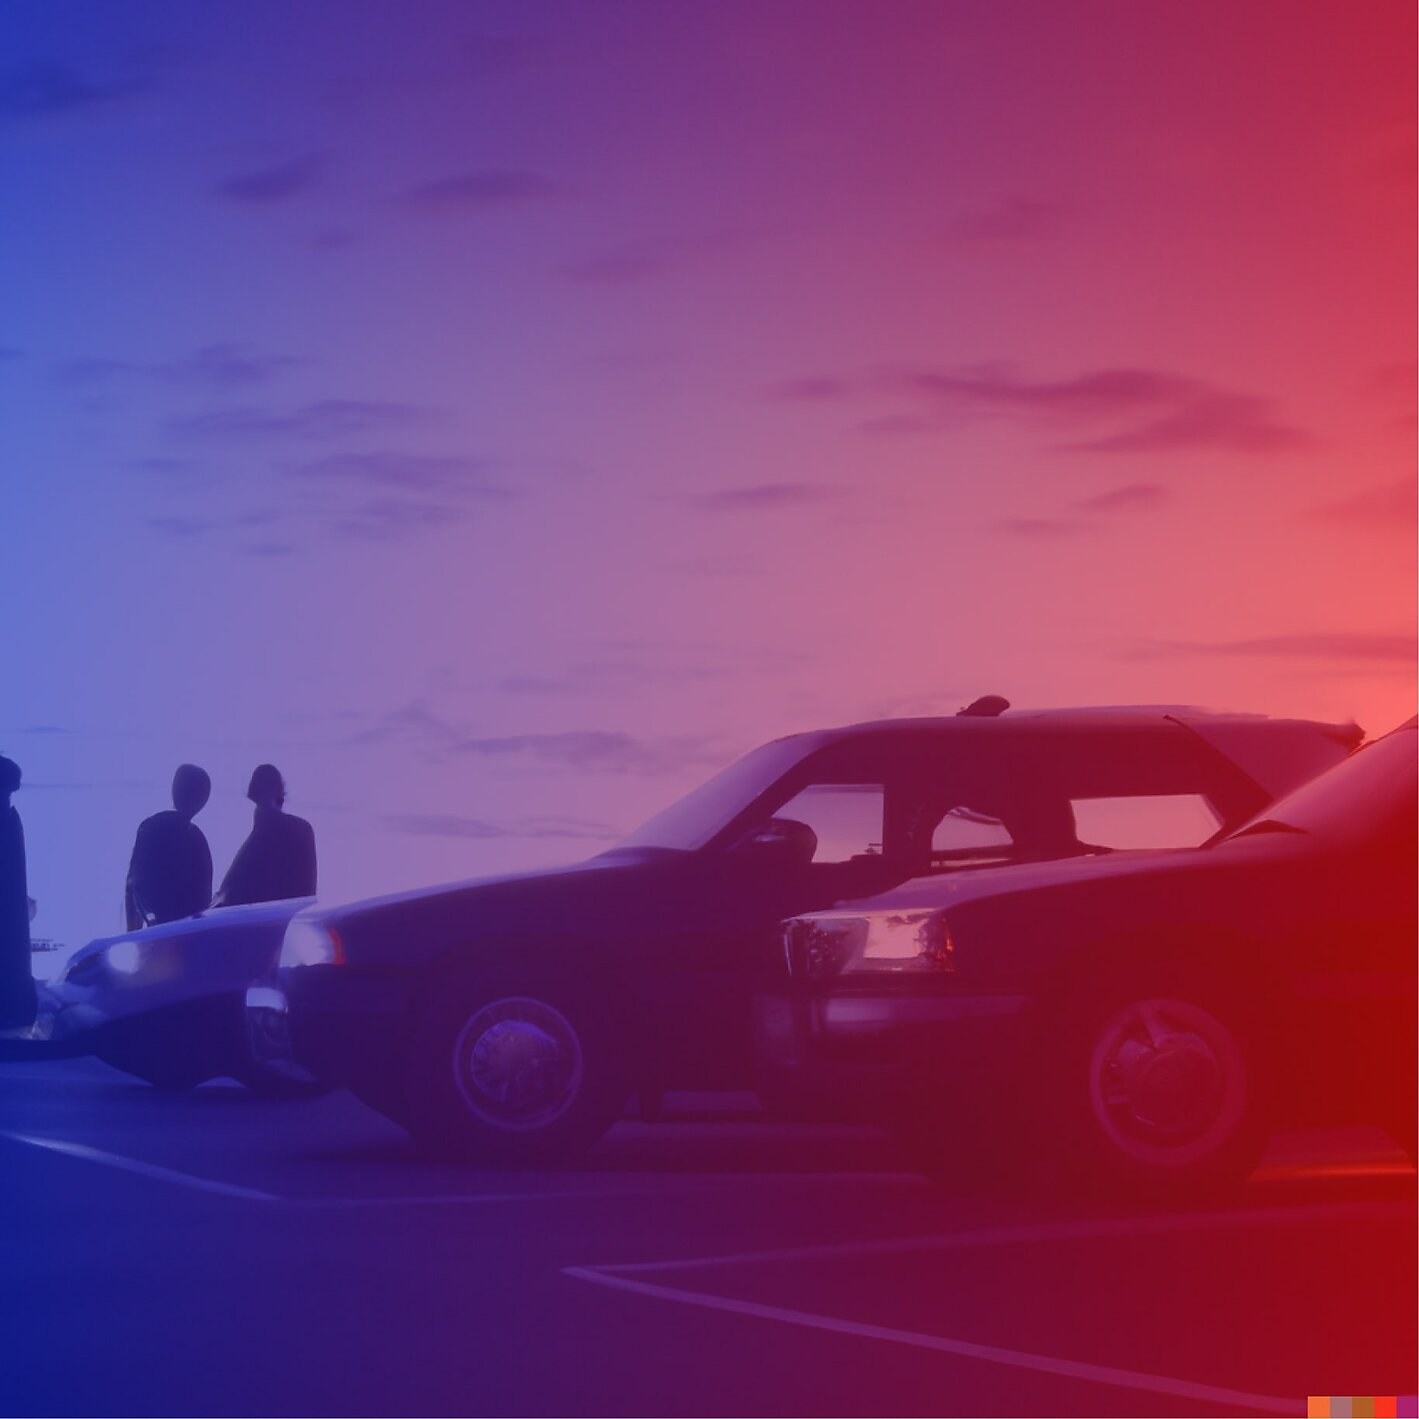 Representation of agents waiting in a parking lot at dawn.